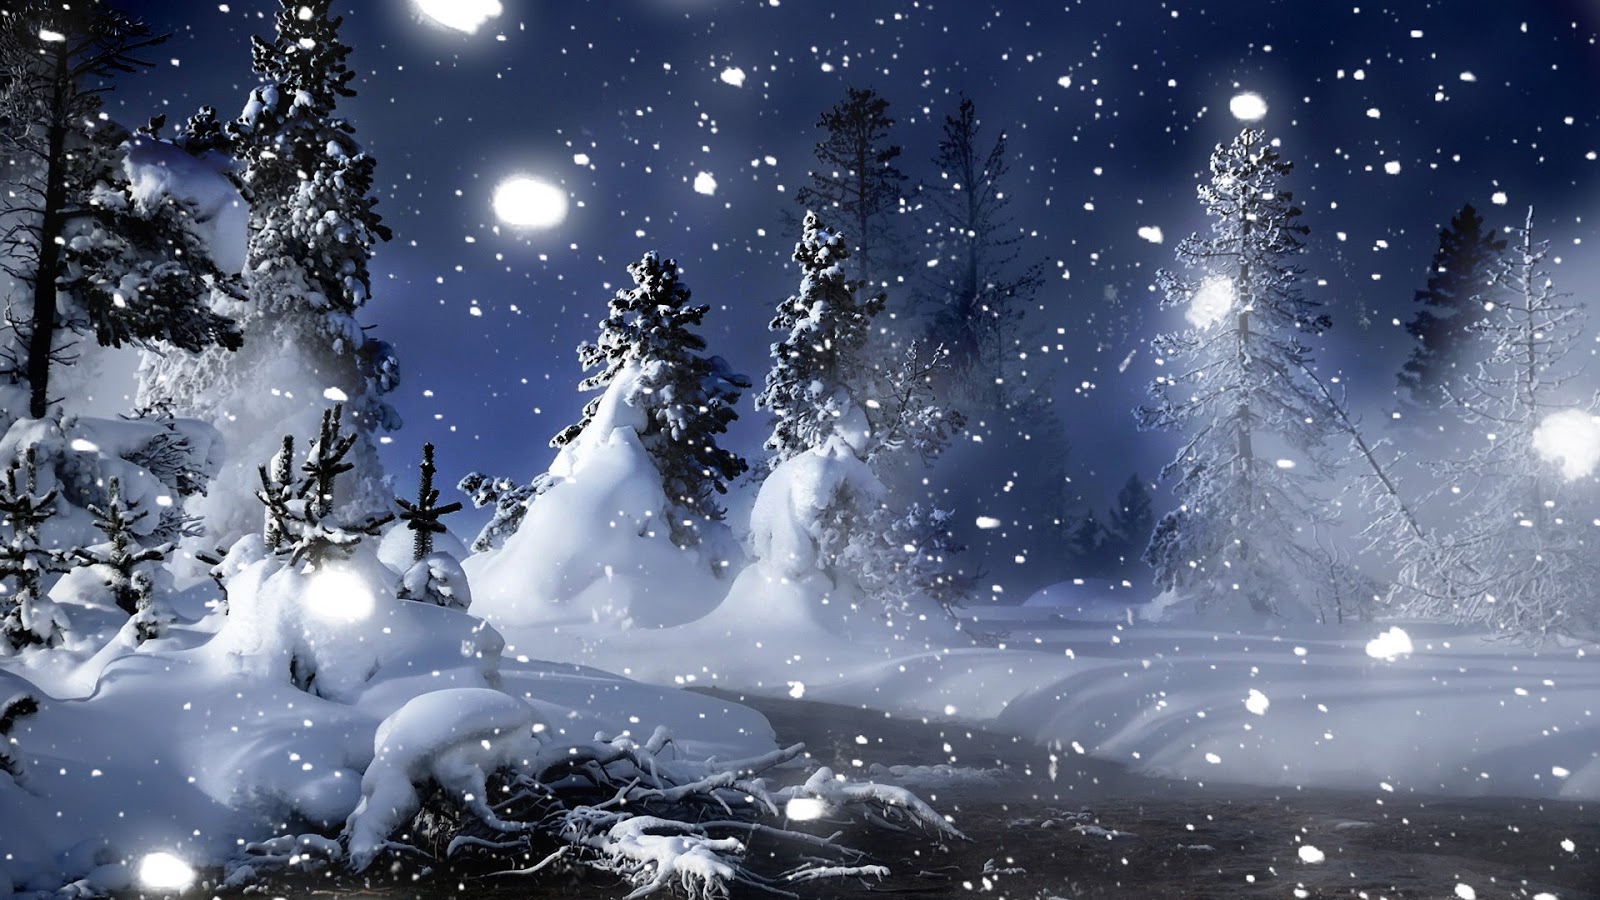 80,000+ Best Winter Images & Free HD Stock Photos - Pixabay